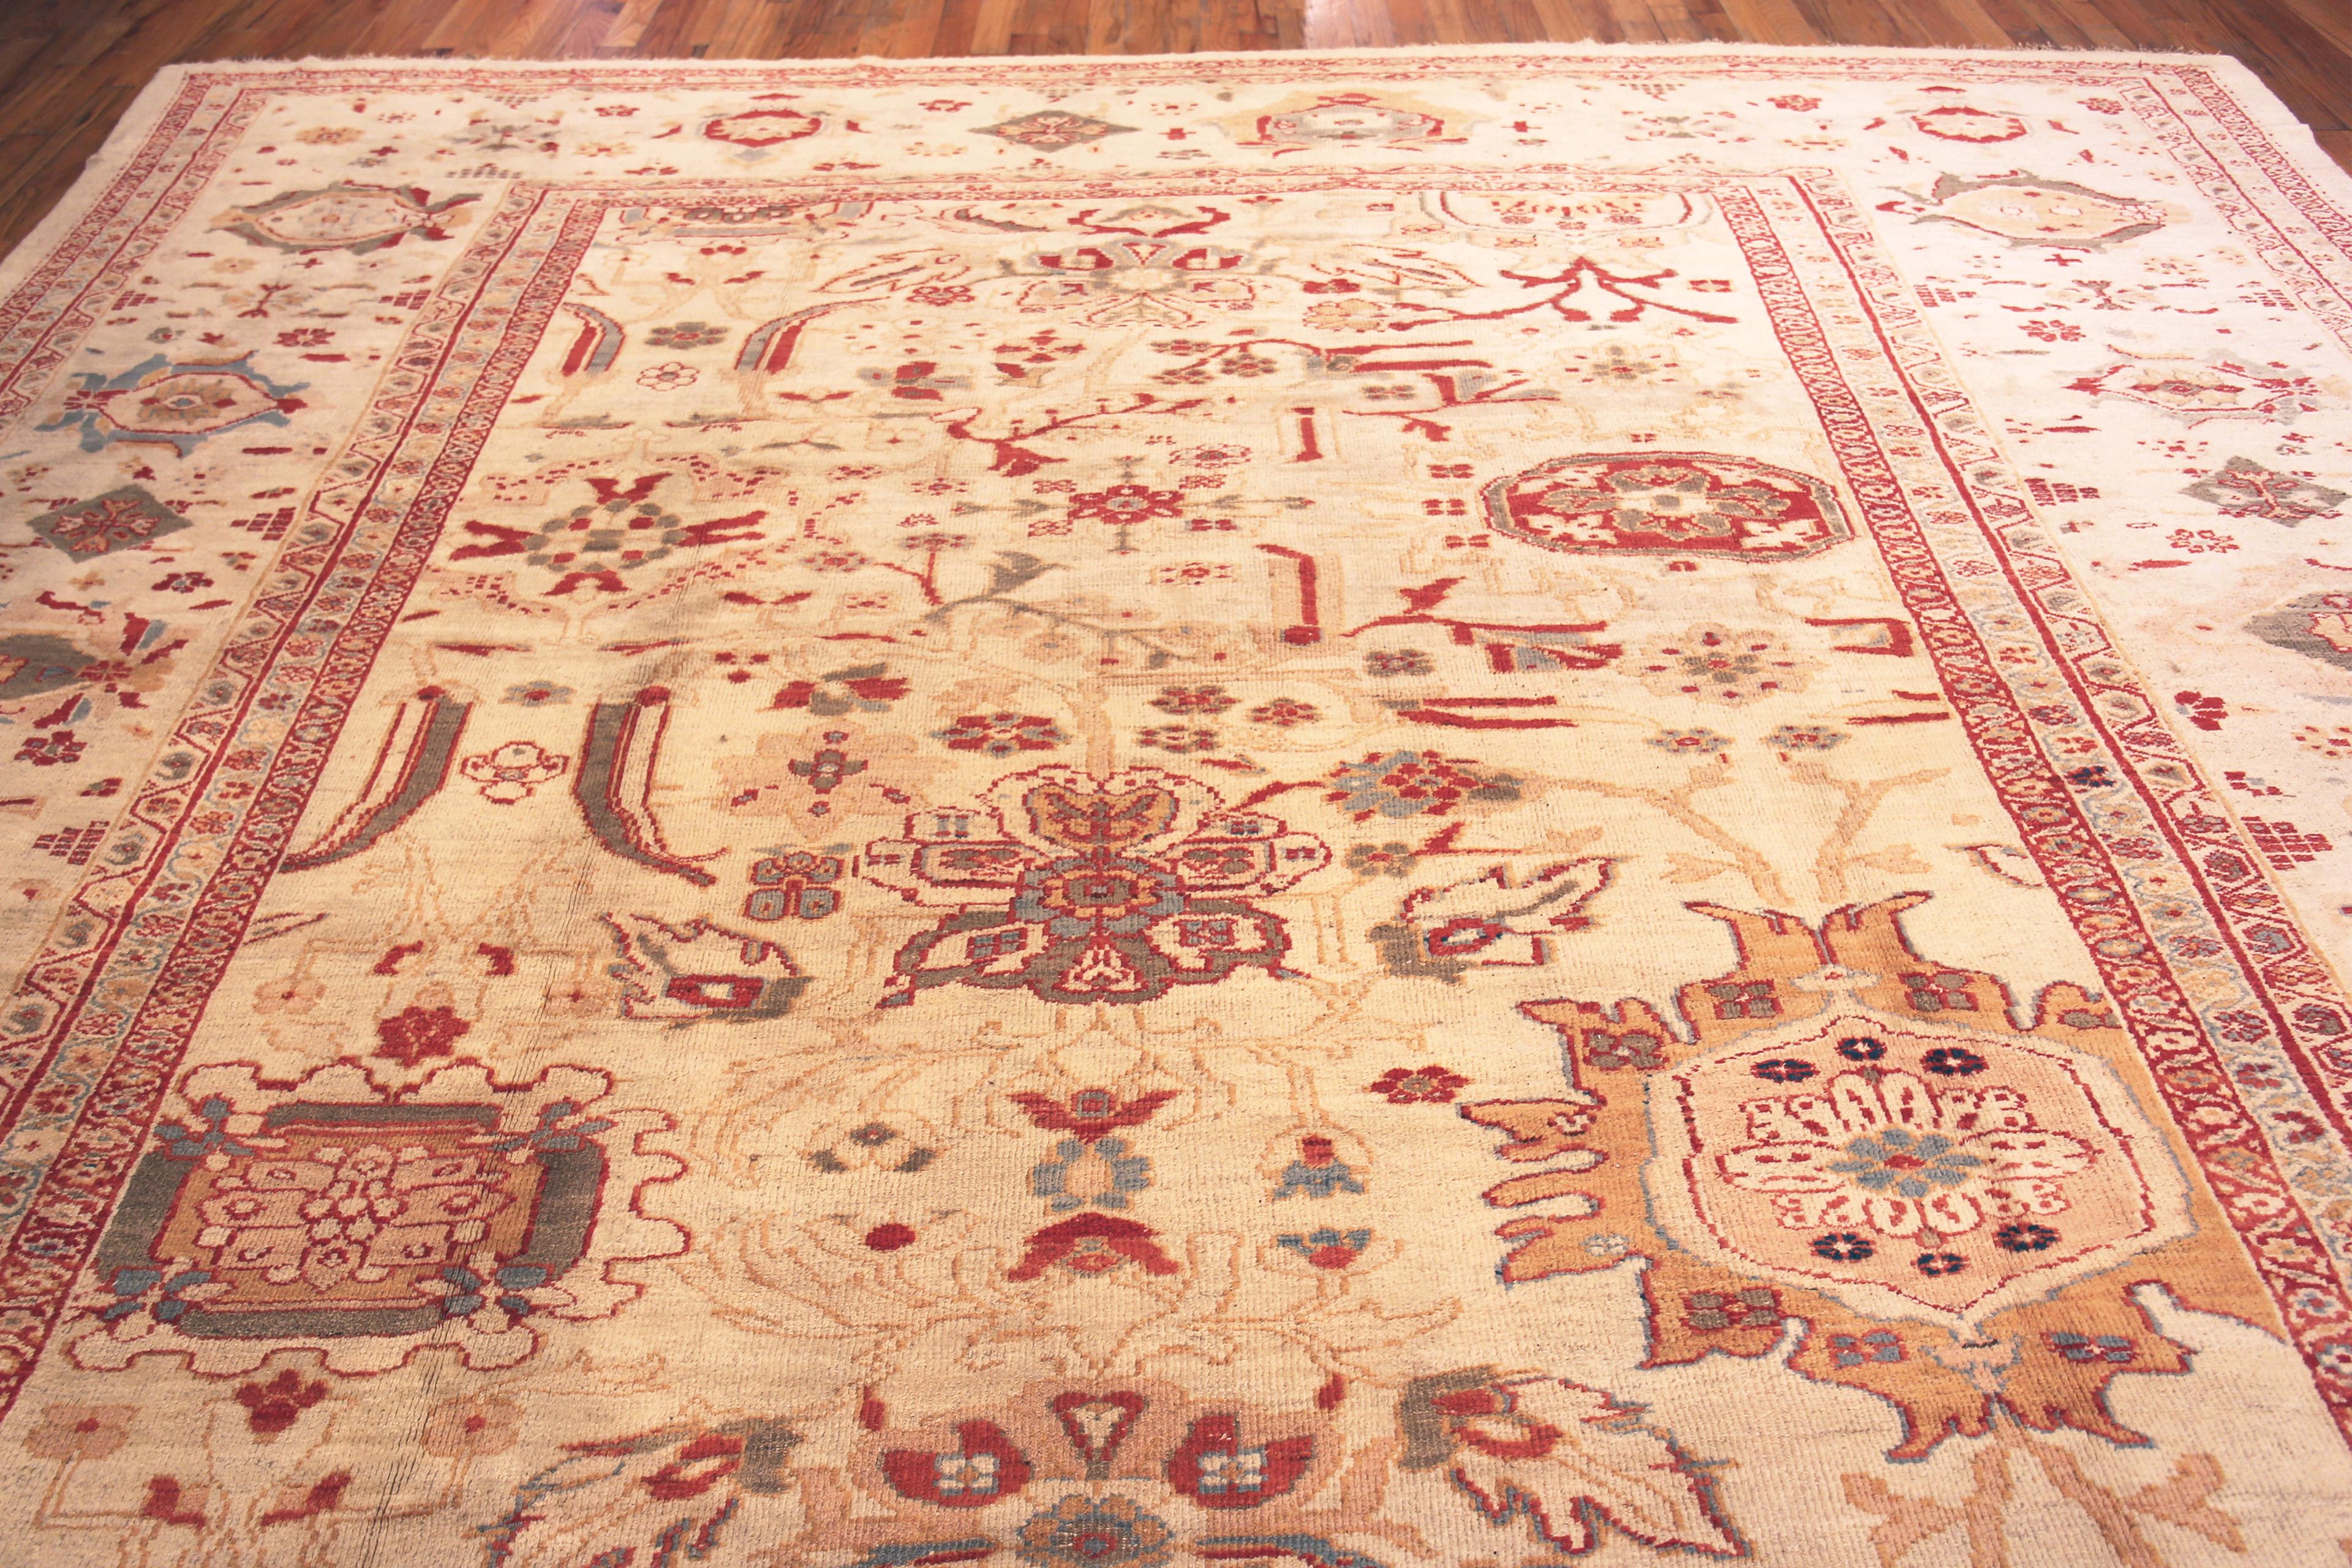 
Impressive Oversized Luxurious Ivory Antique Persian Ziegler Sultanabad Rug, Country of Origin: Persia, Circa date: 1880 – The city of Sultanabad was once known as Arak and is located in what is now Iran. The region has a long history of carpet